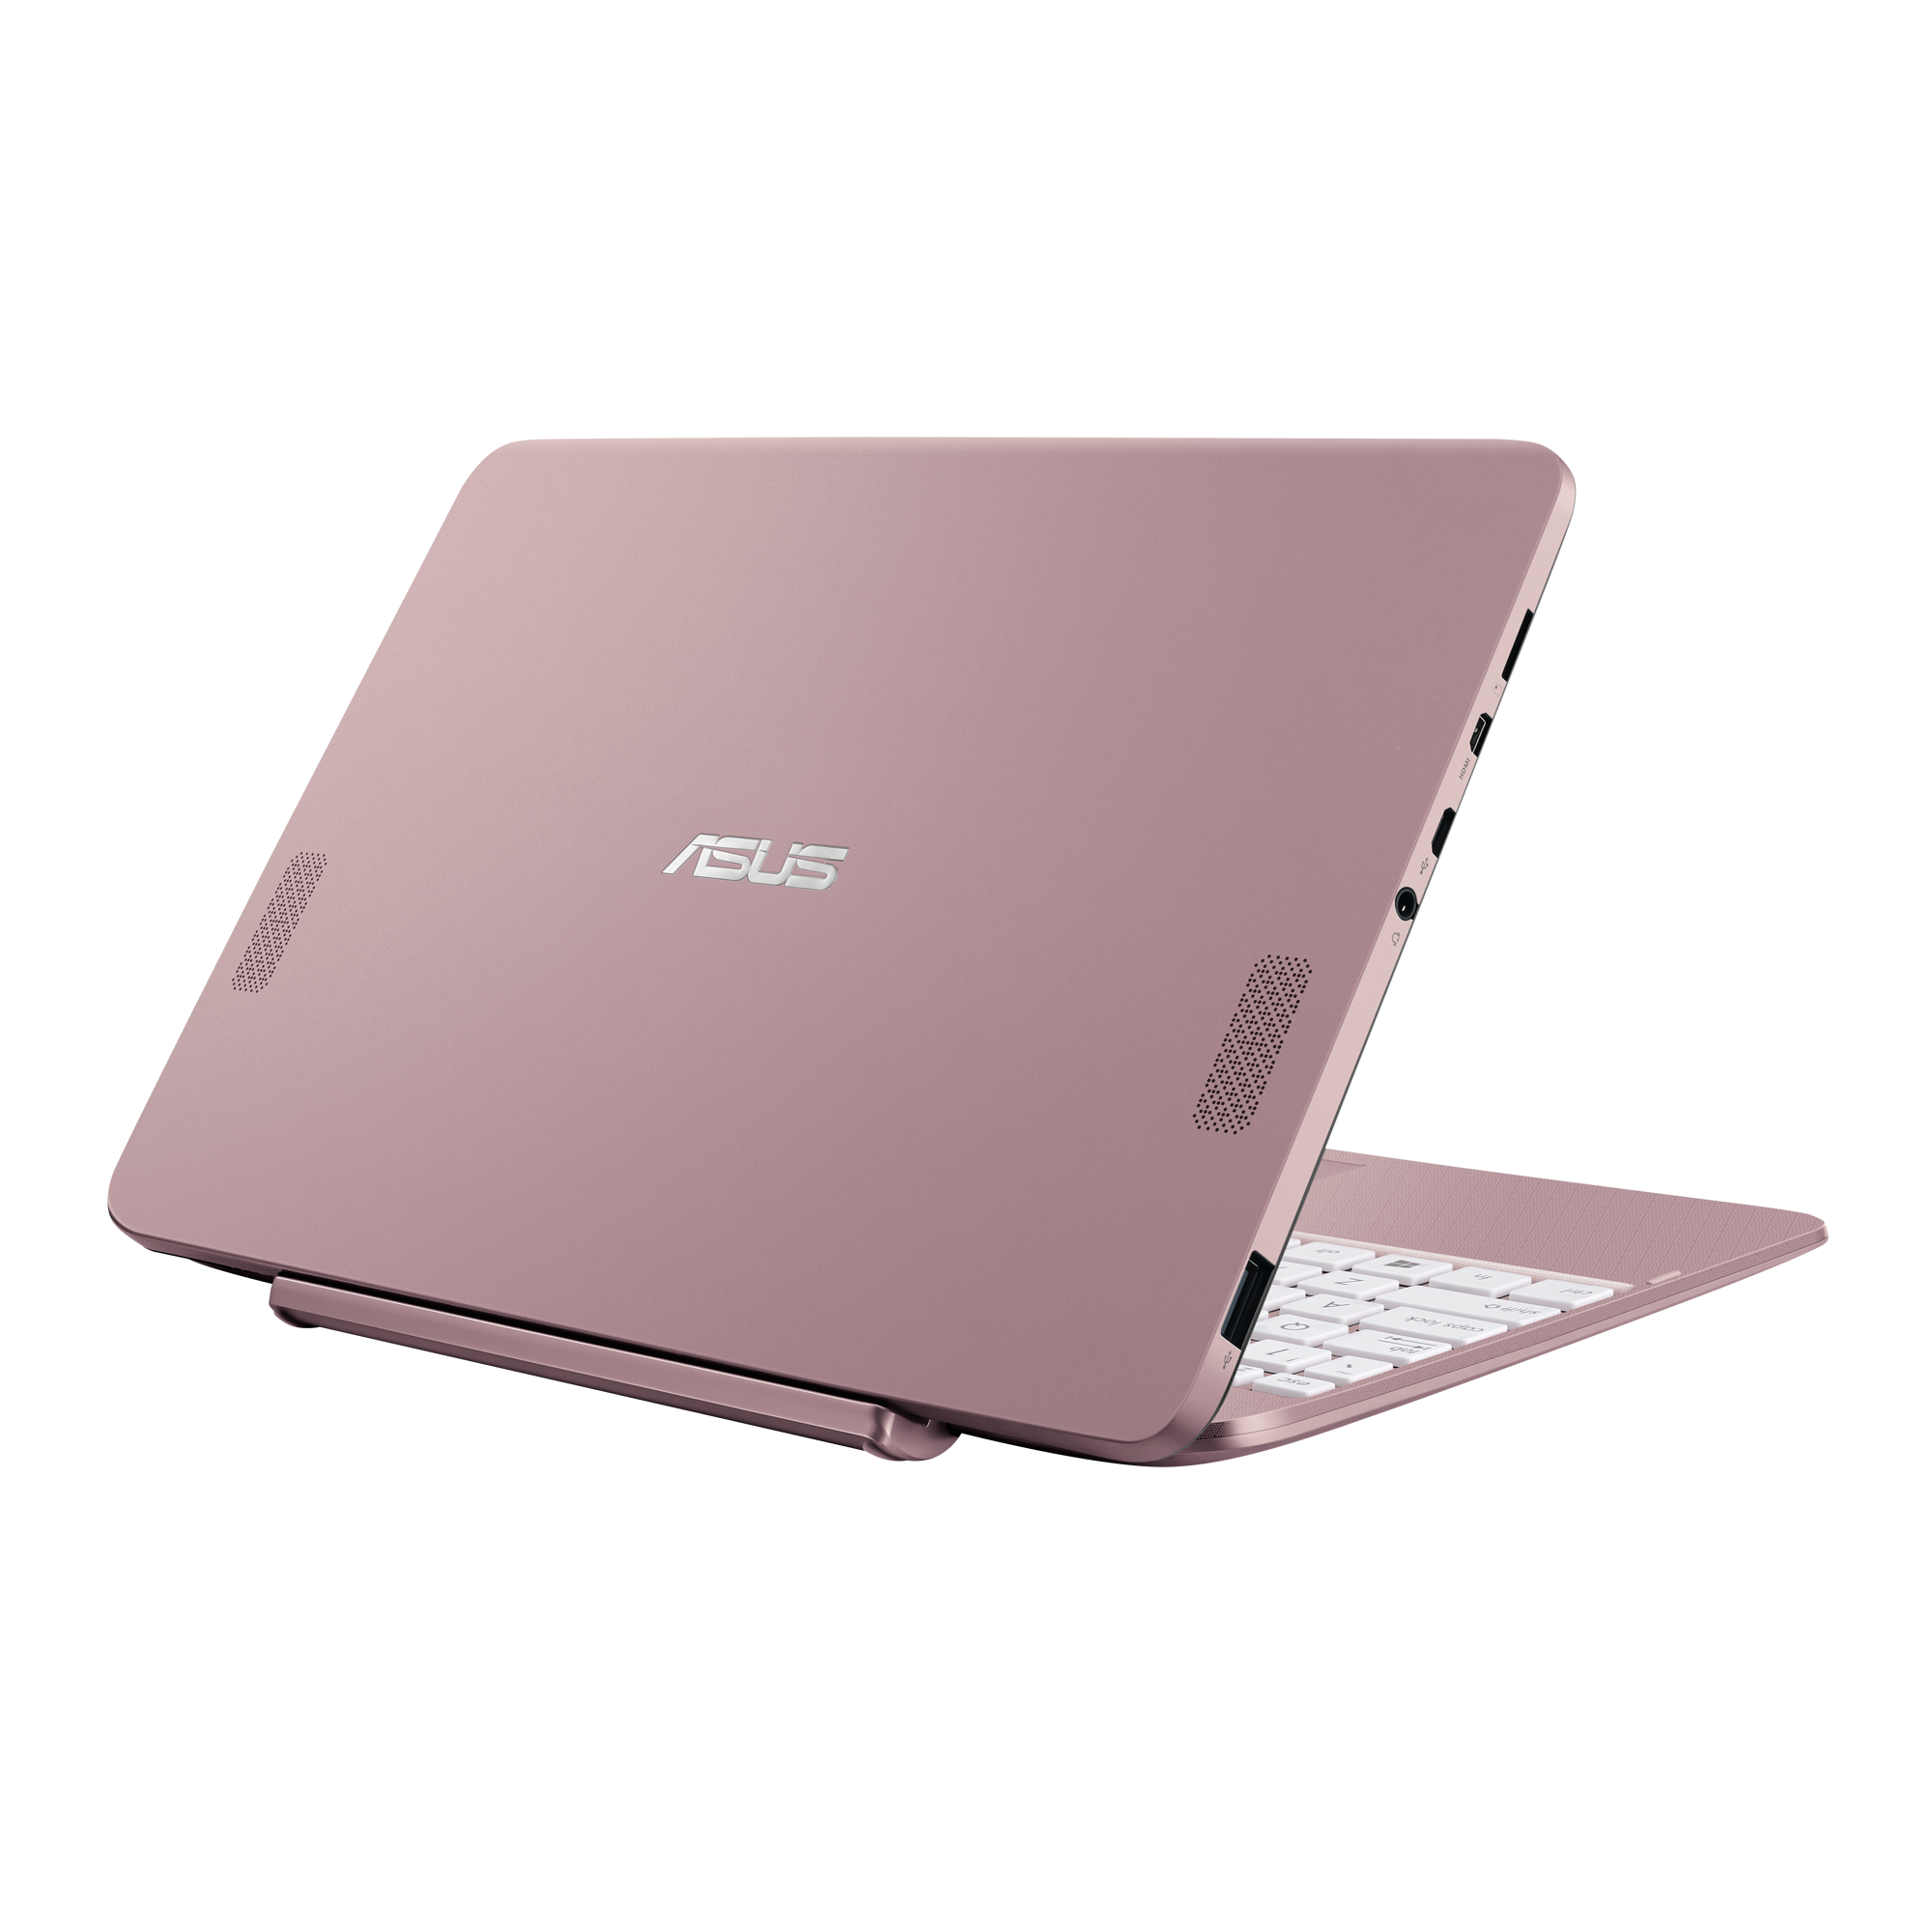 ASUS Transformer Book T101｜Laptops For Home｜ASUS Canada